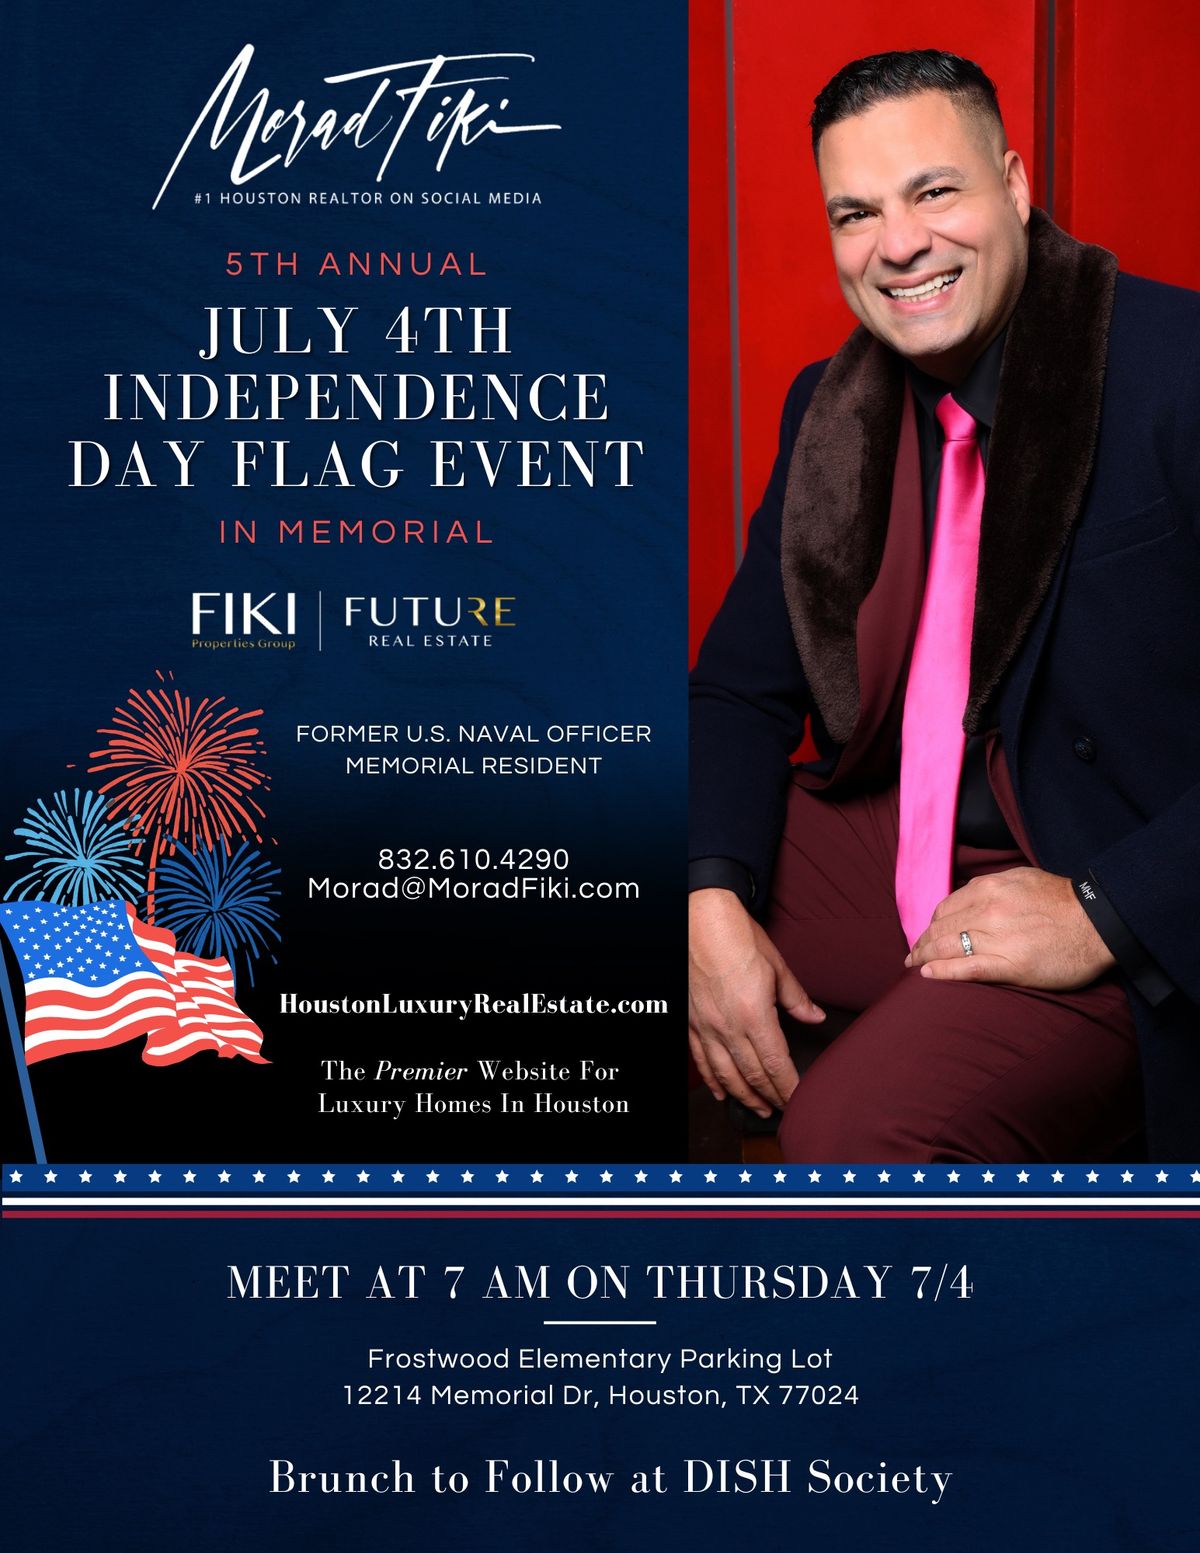 5th Annual July 4th Independence Day Flag Event In Memorial!